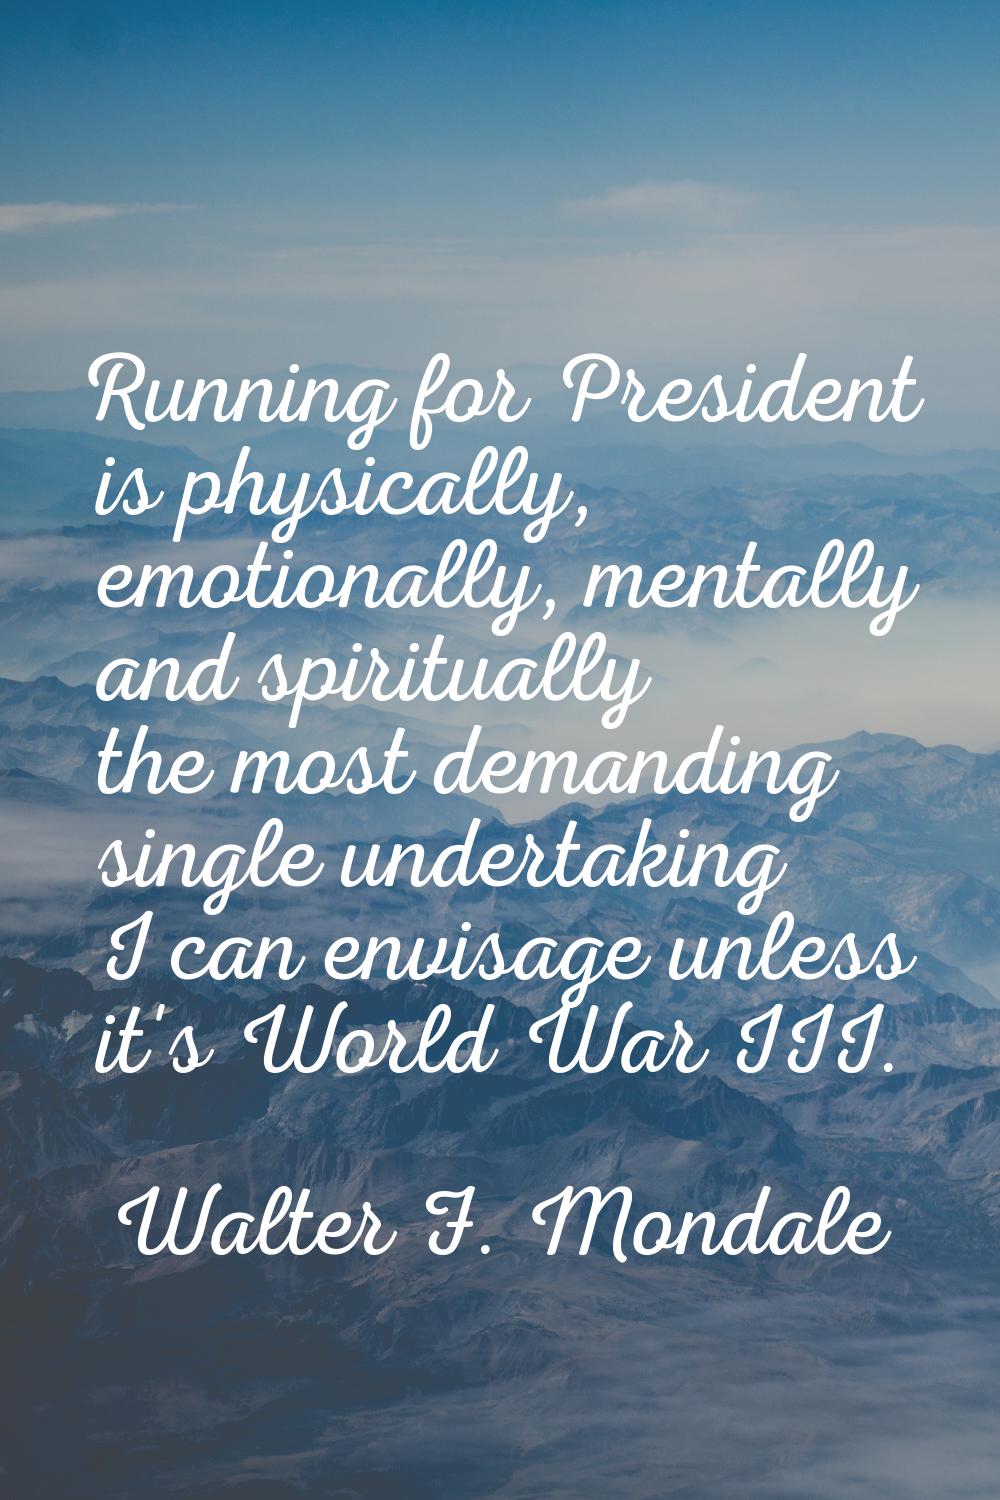 Running for President is physically, emotionally, mentally and spiritually the most demanding singl